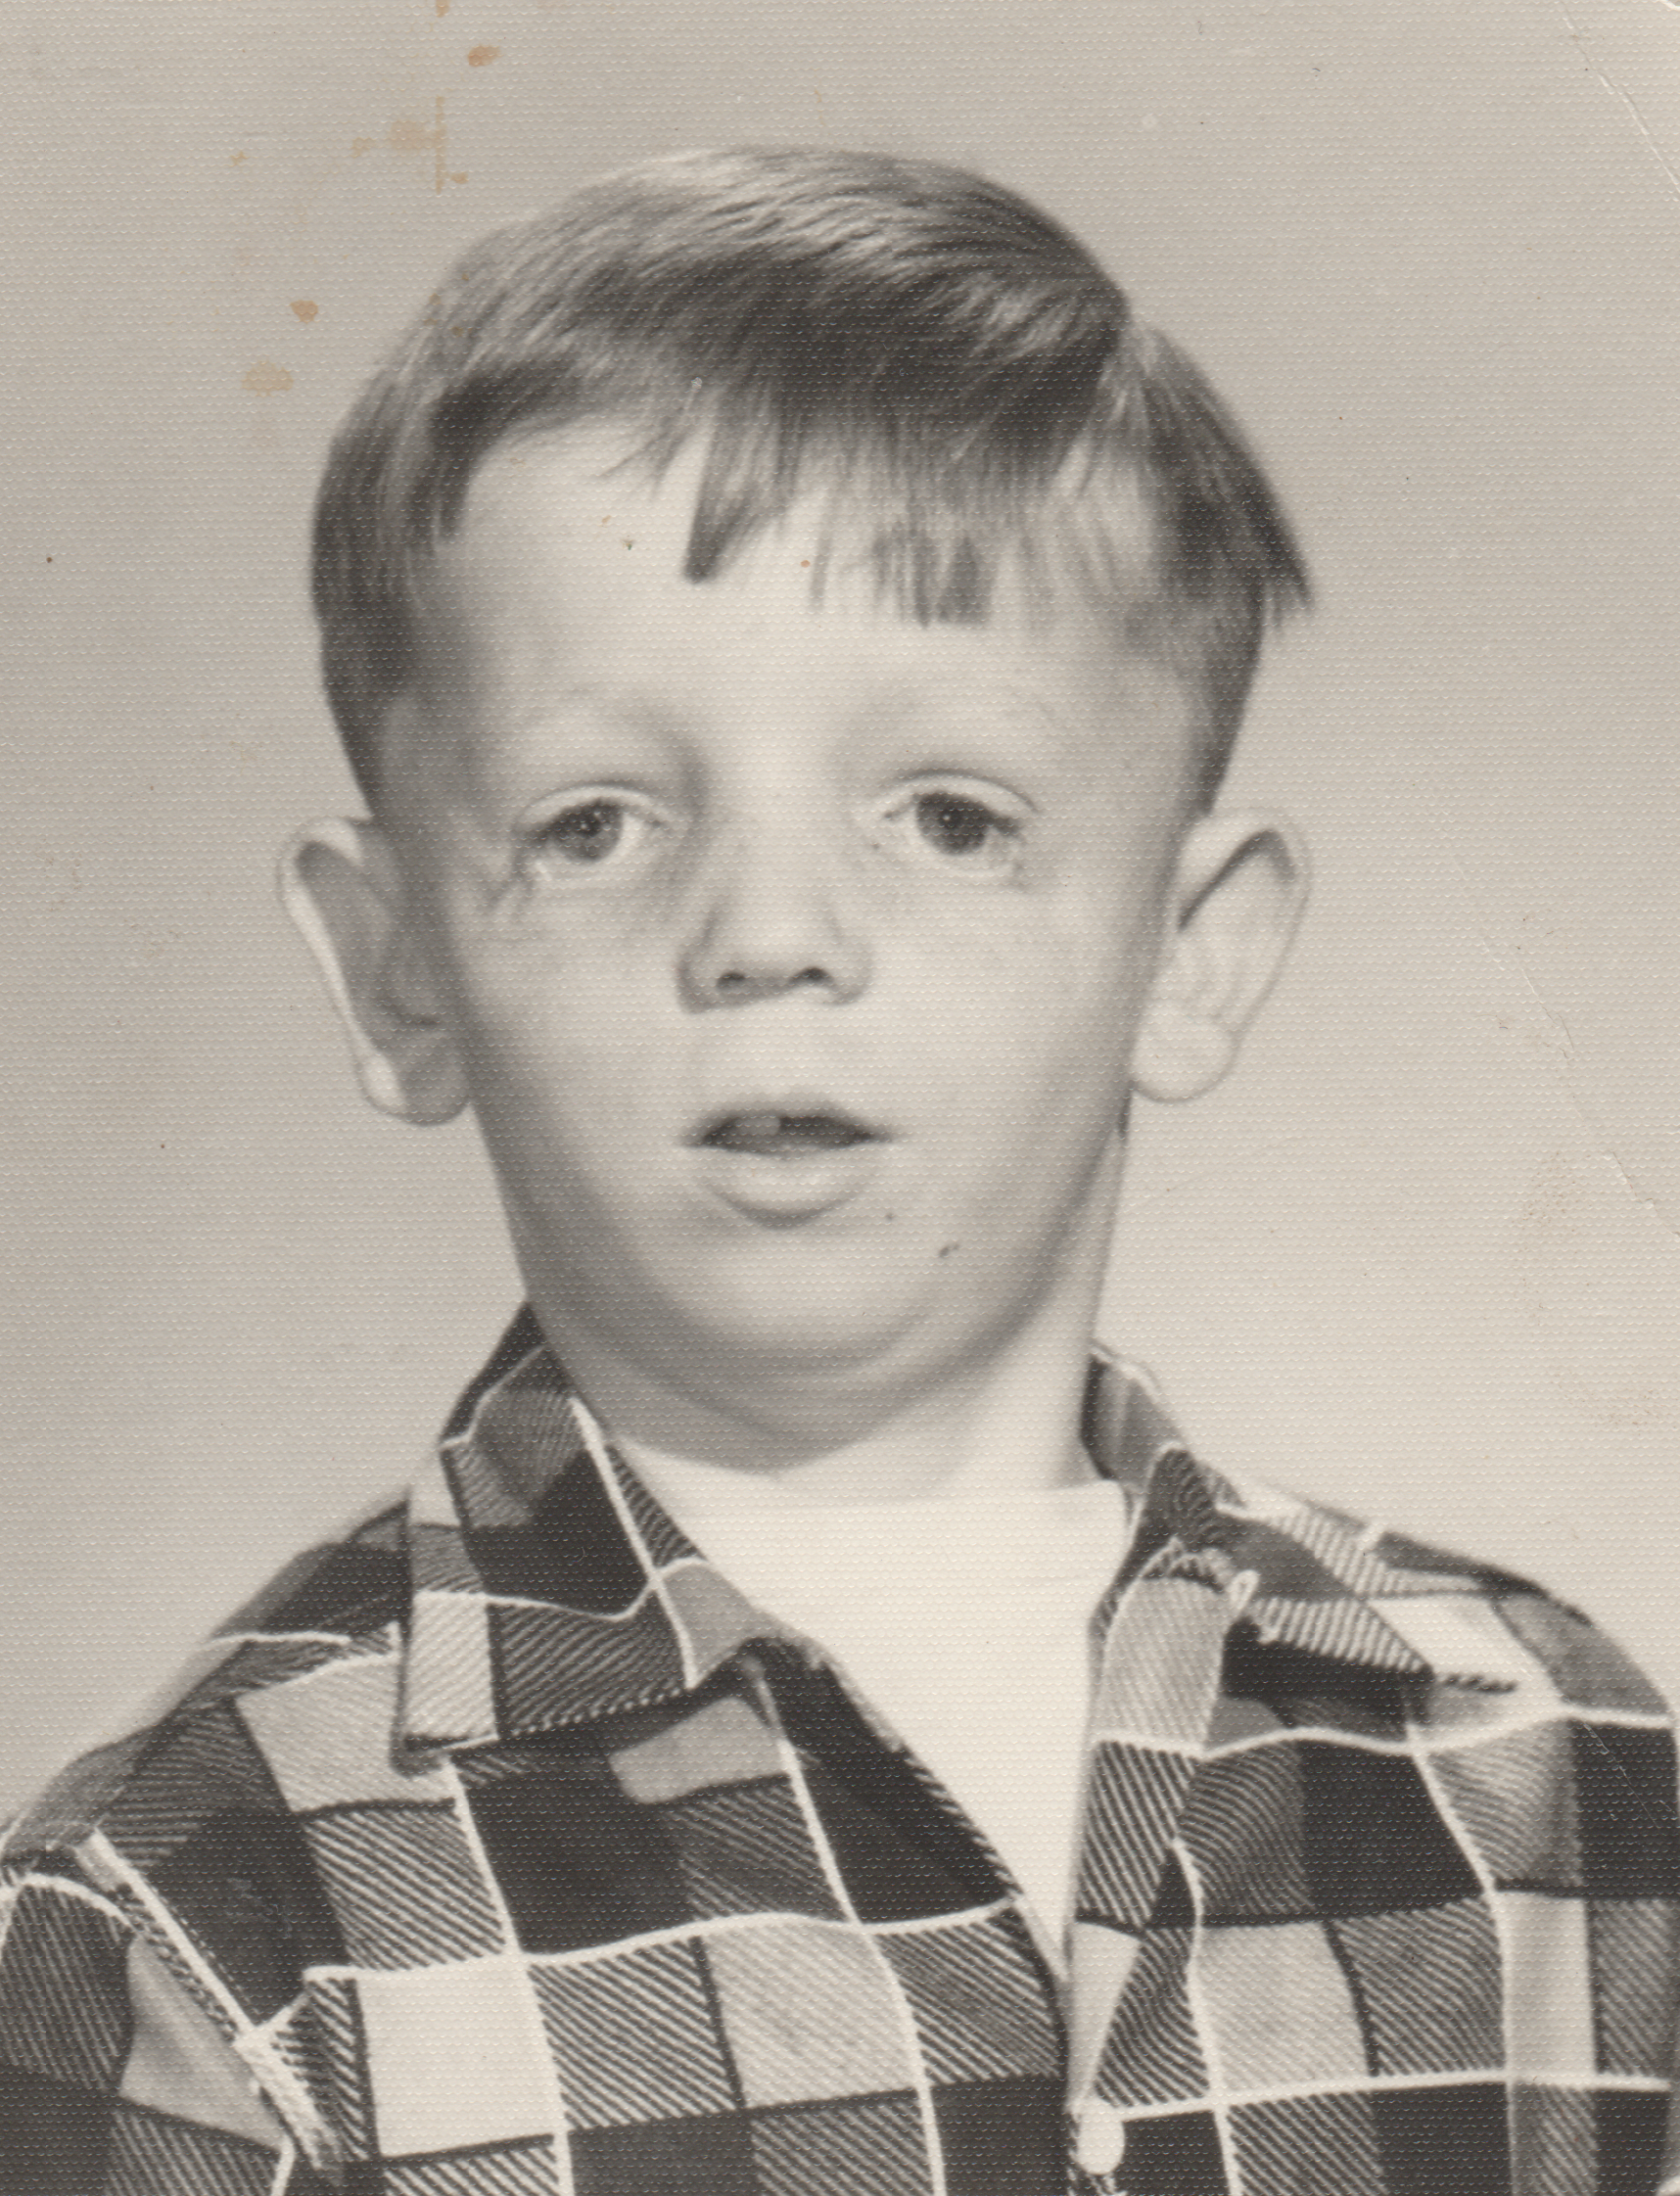 1960 maybe - dad born in 1950 - 01.png